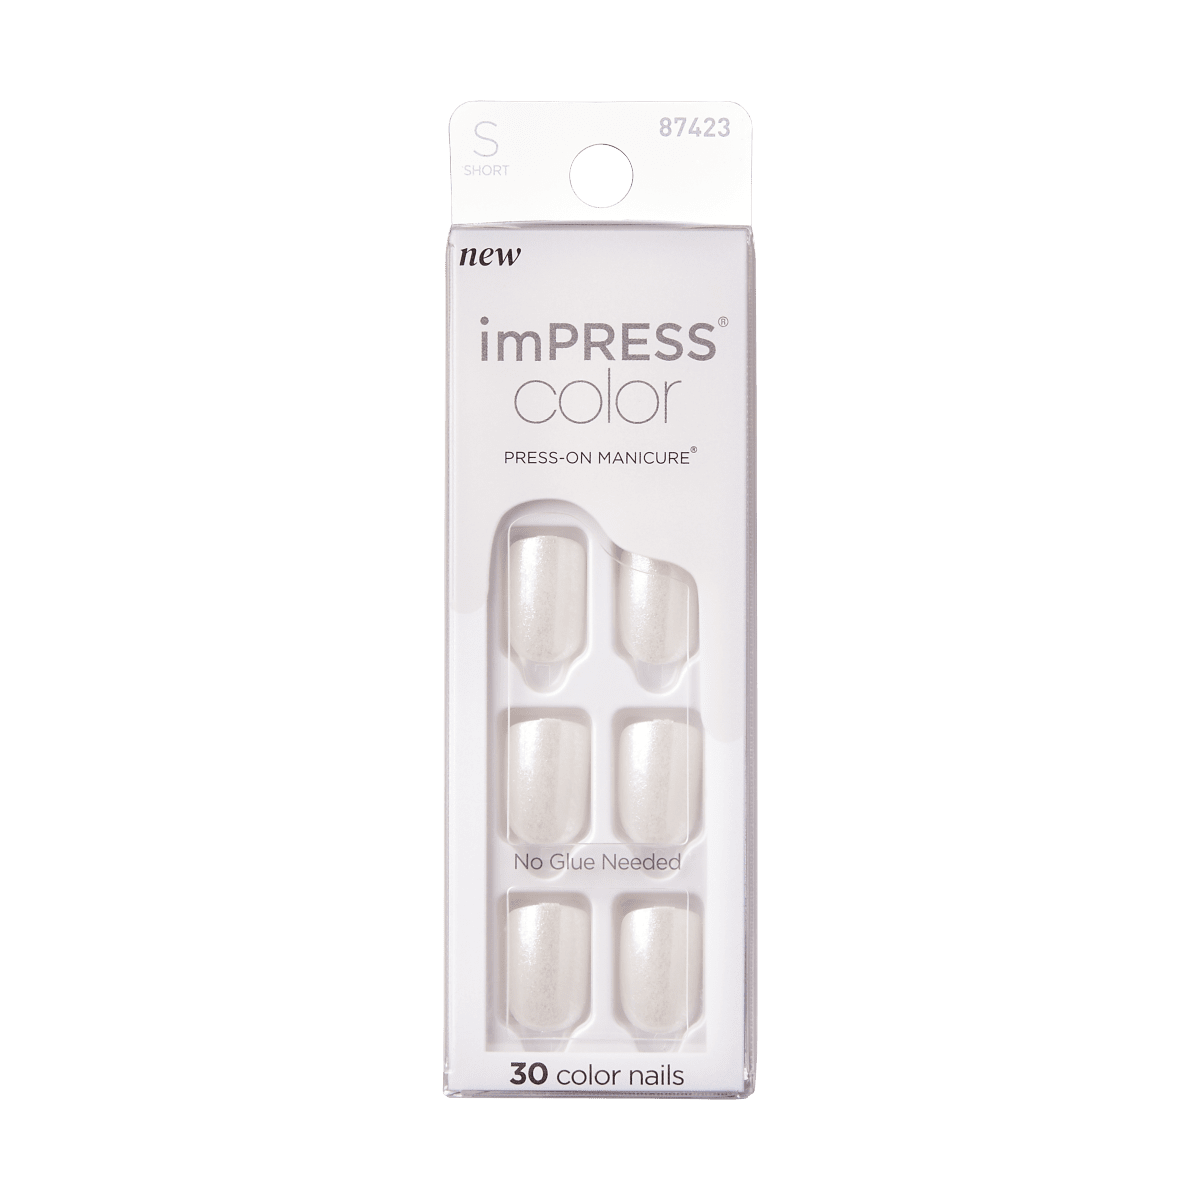 imPRESS Color Press-On Manicure - Pearlfection